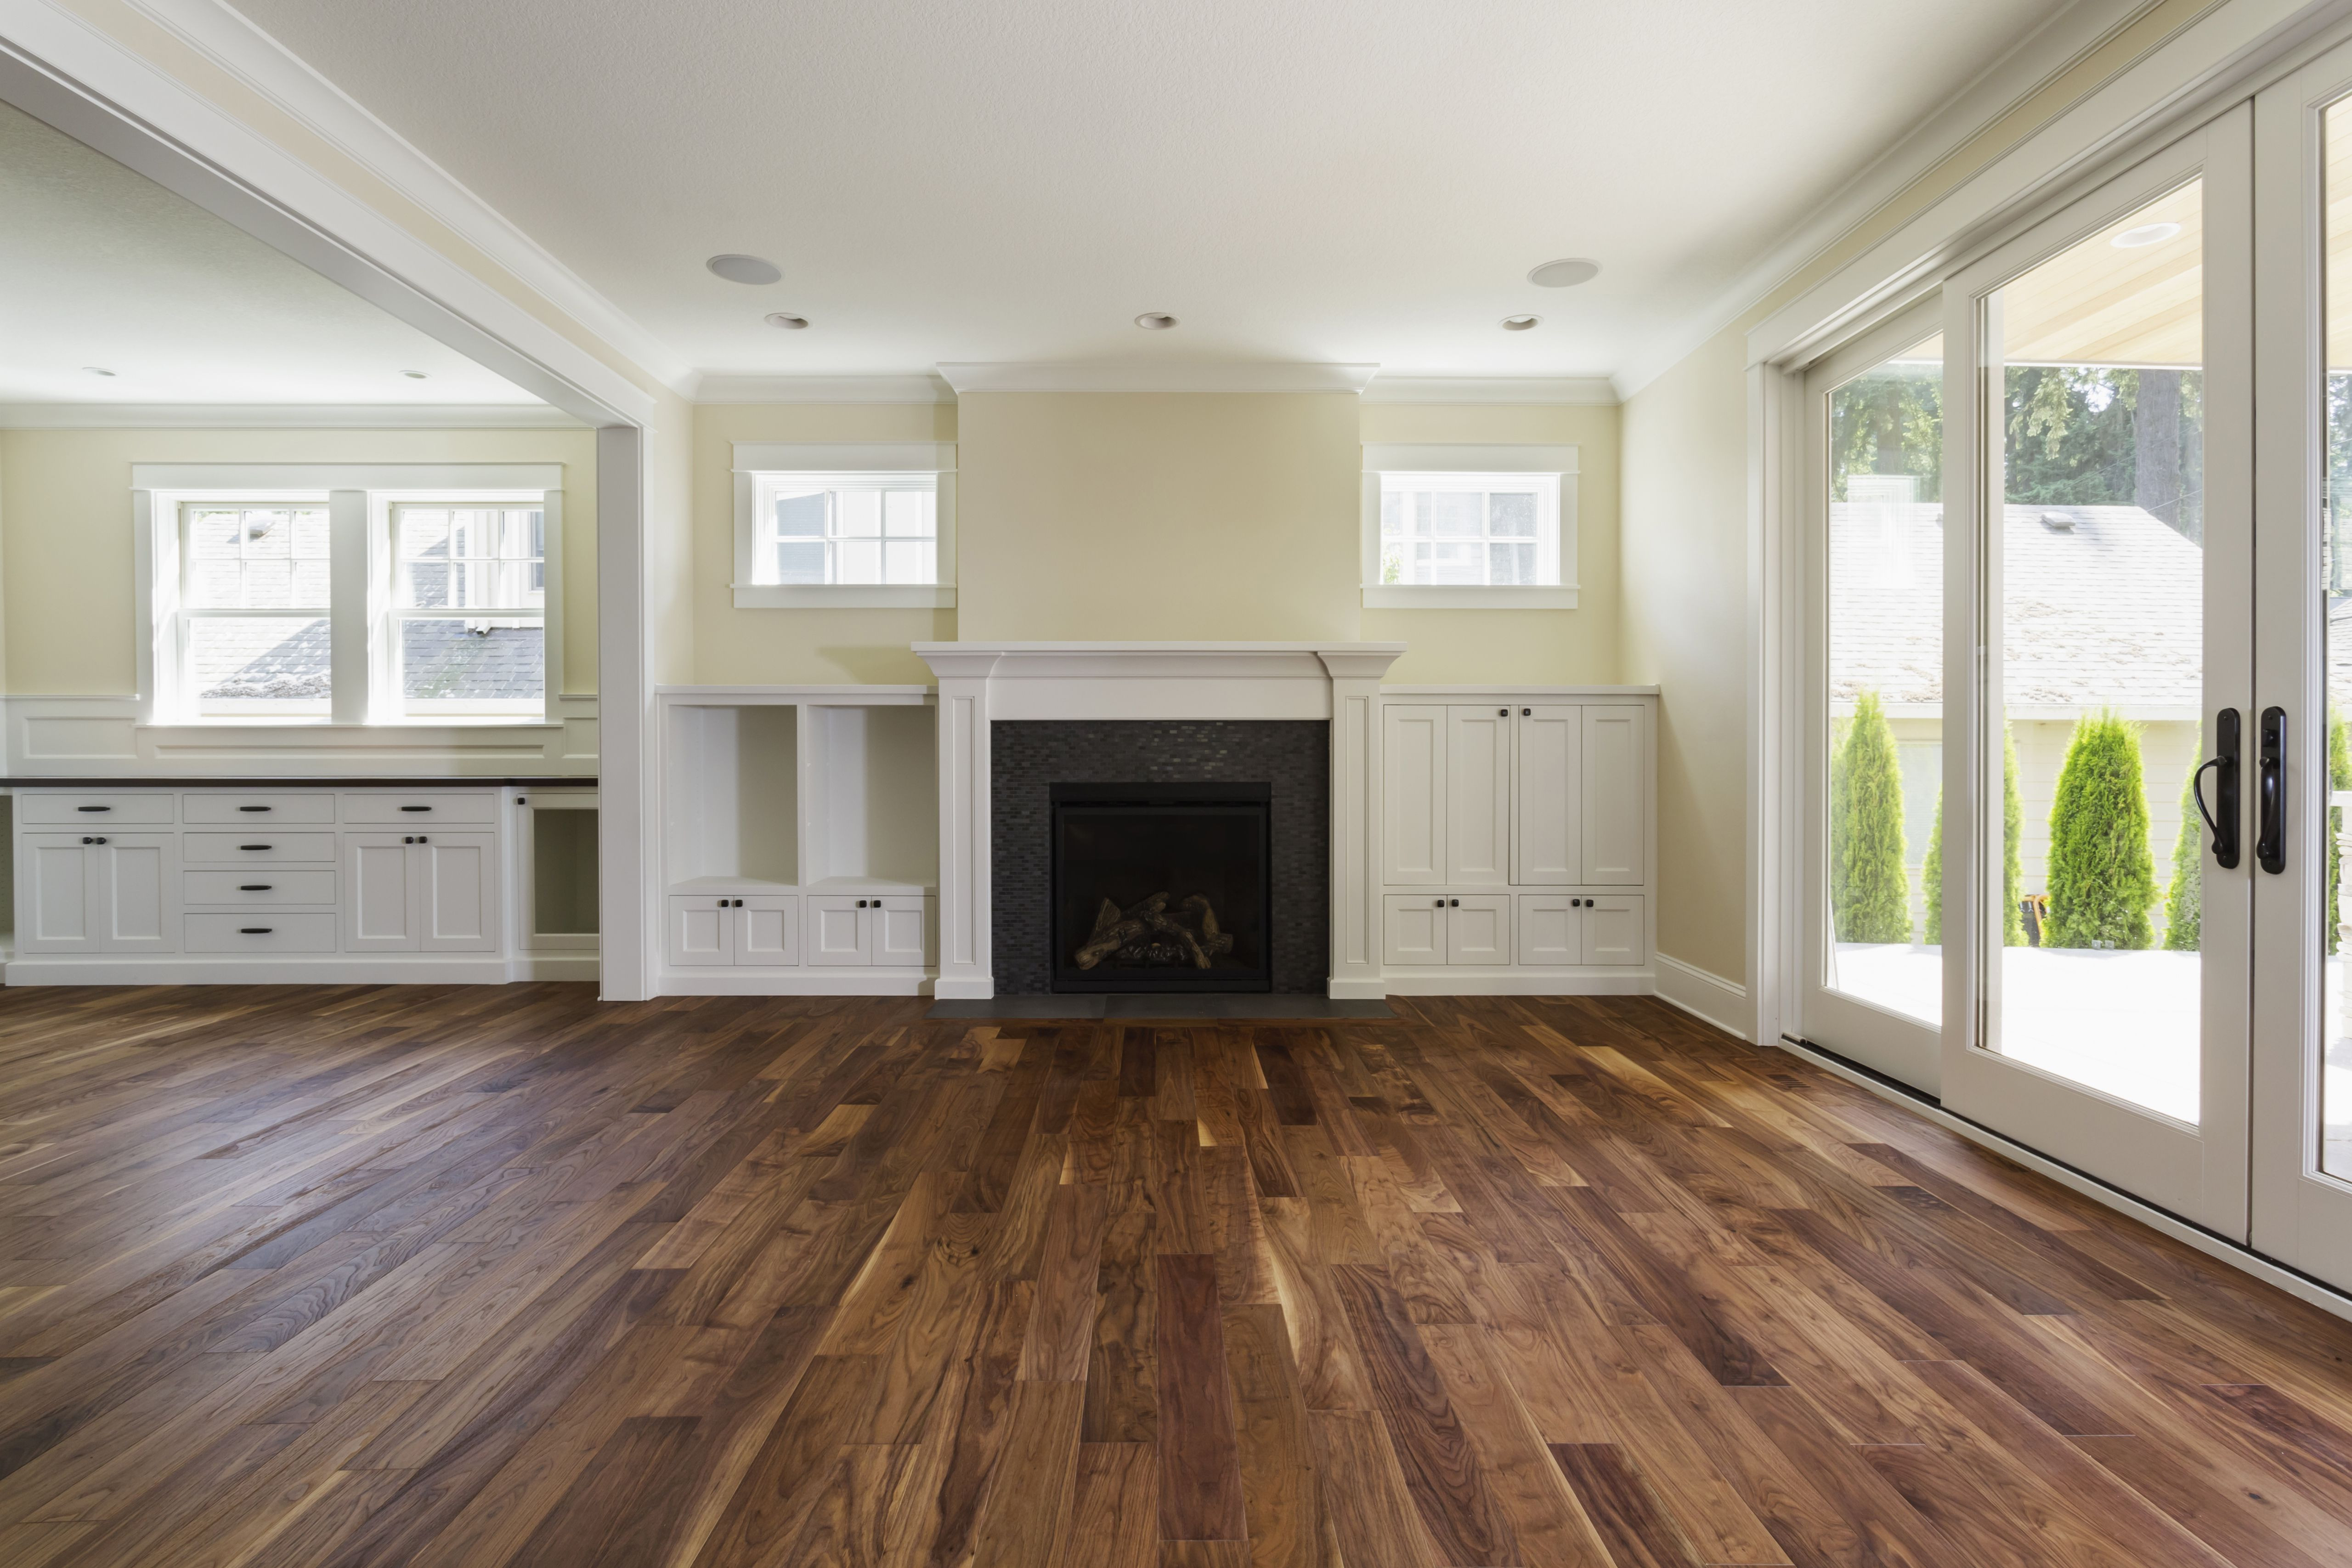 hardwood flooring manufacturing equipment of the pros and cons of prefinished hardwood flooring throughout fireplace and built in shelves in living room 482143011 57bef8e33df78cc16e035397